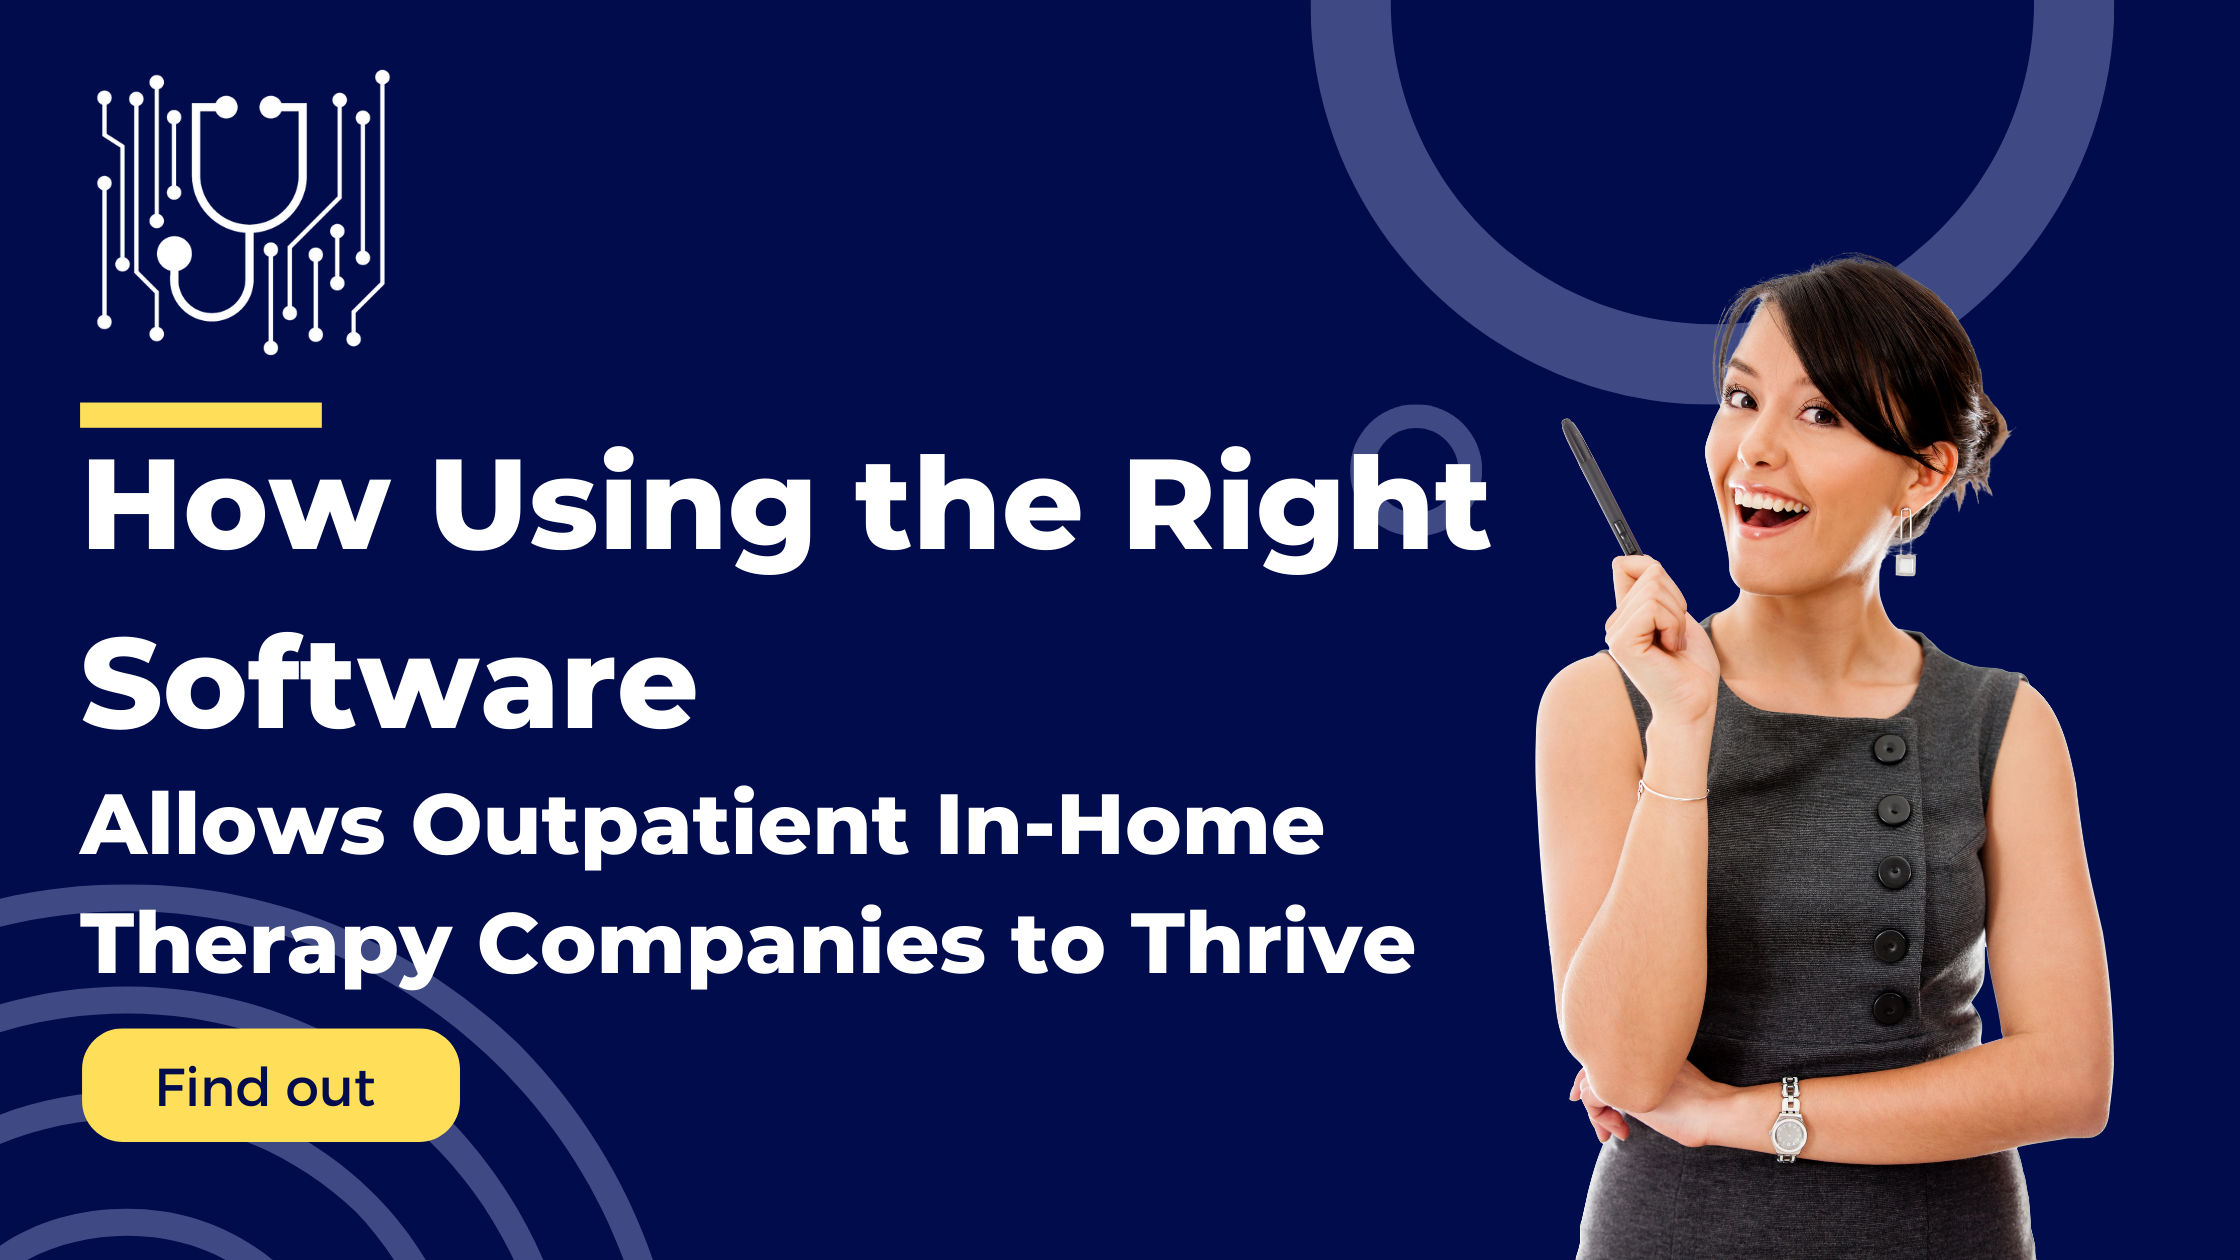 How Using the Right Software Allows Outpatient In-Home Therapy Companies to Thrive